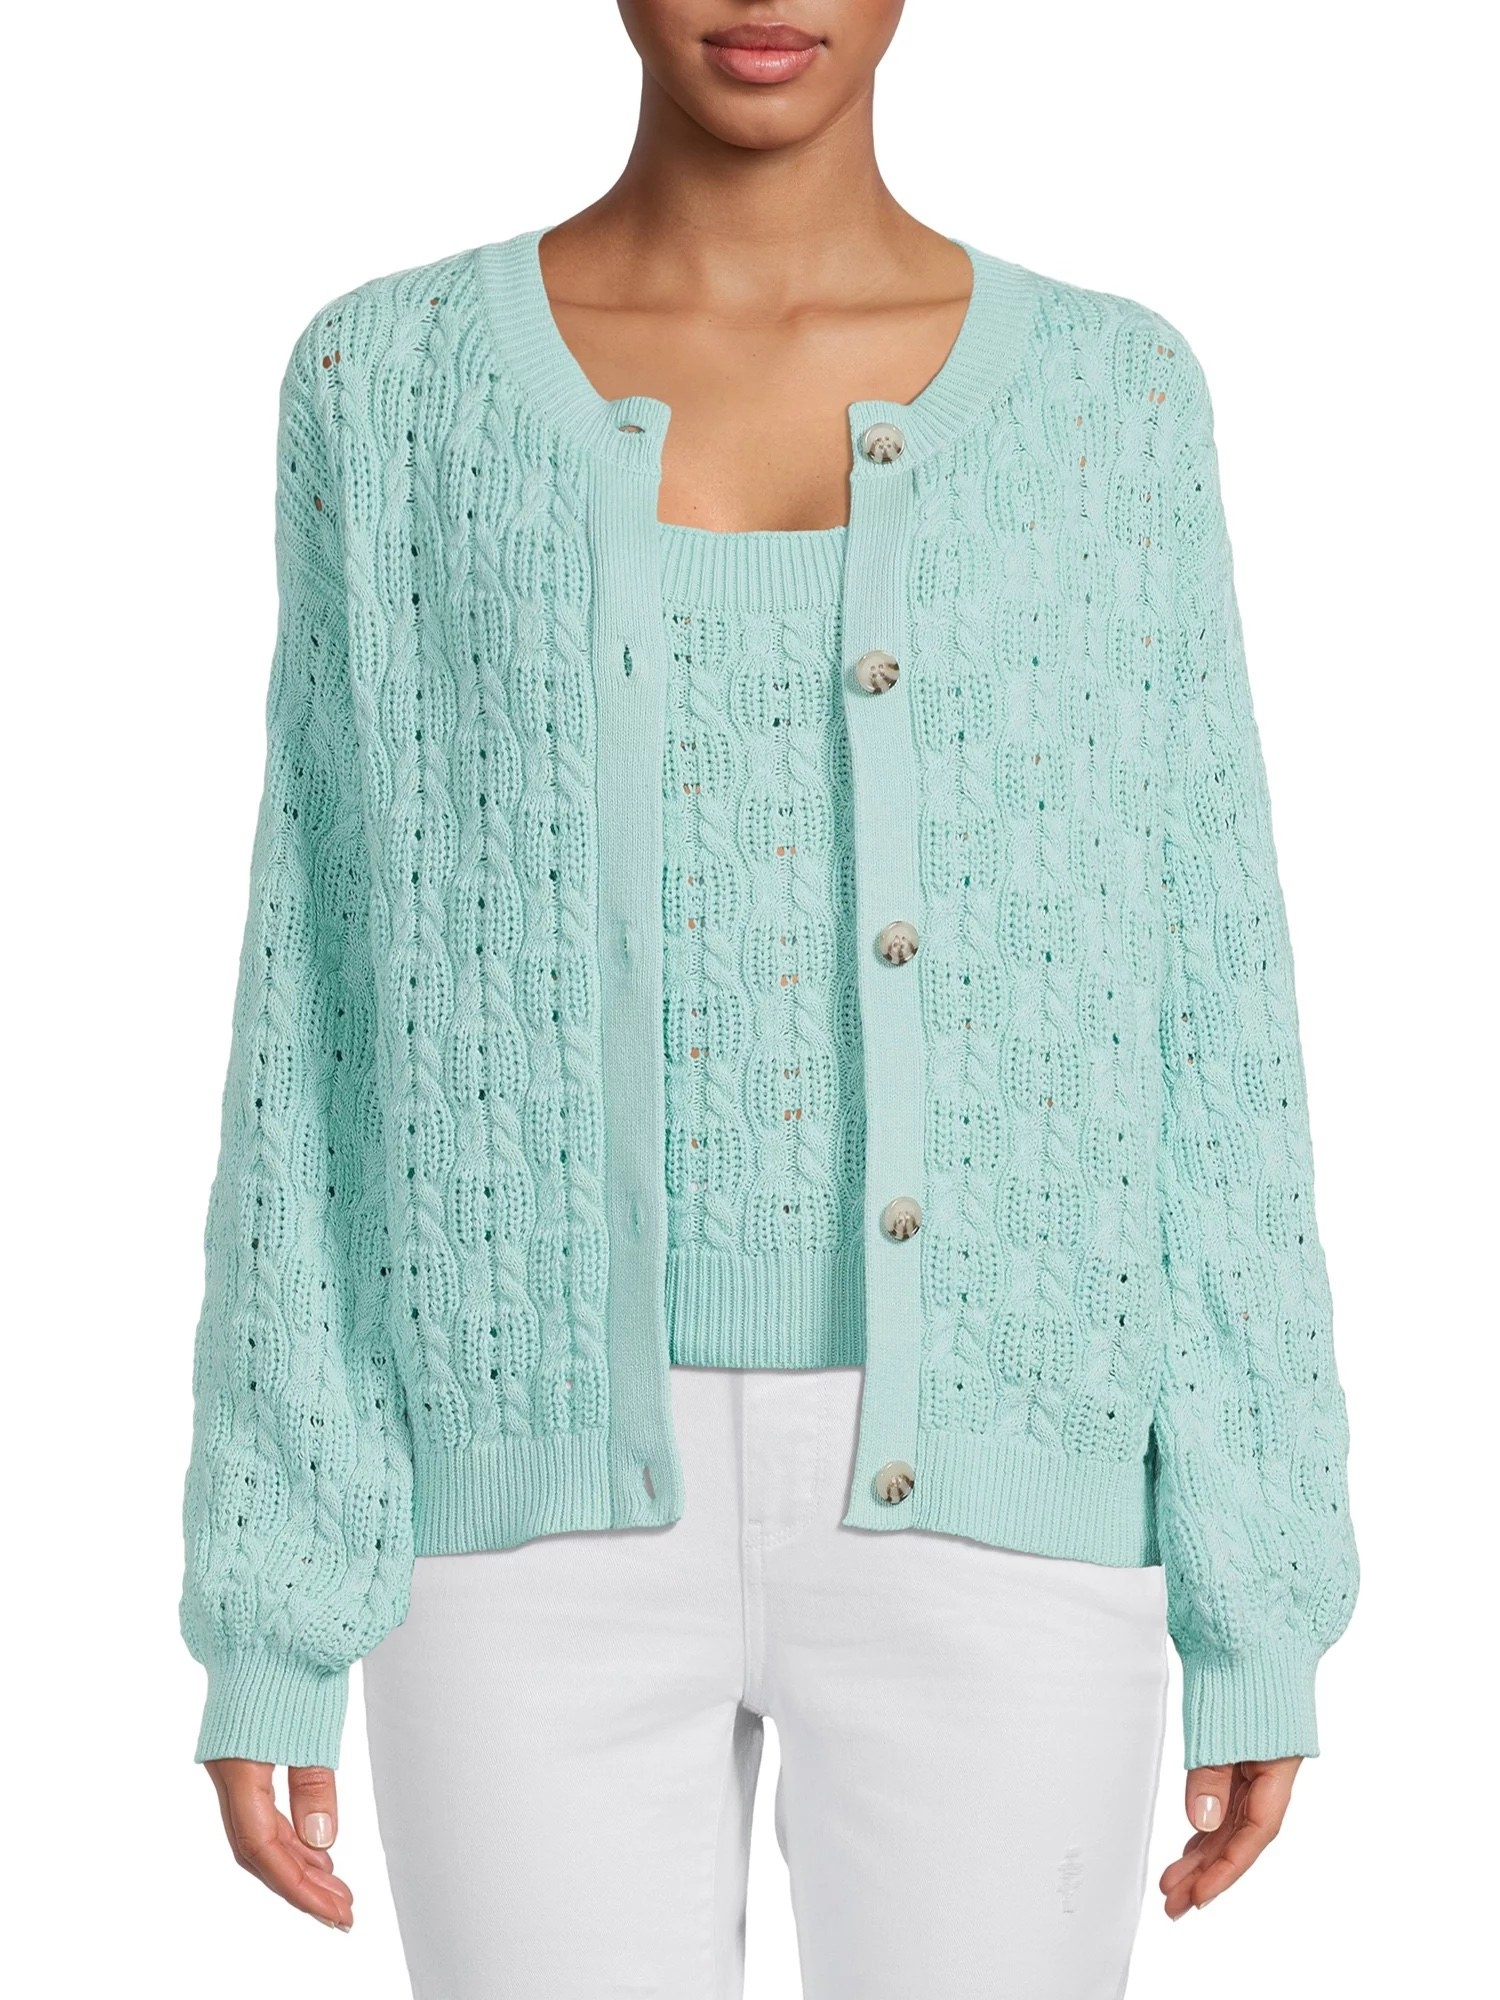 Model wearing matching mint green cardigan and top with white pants